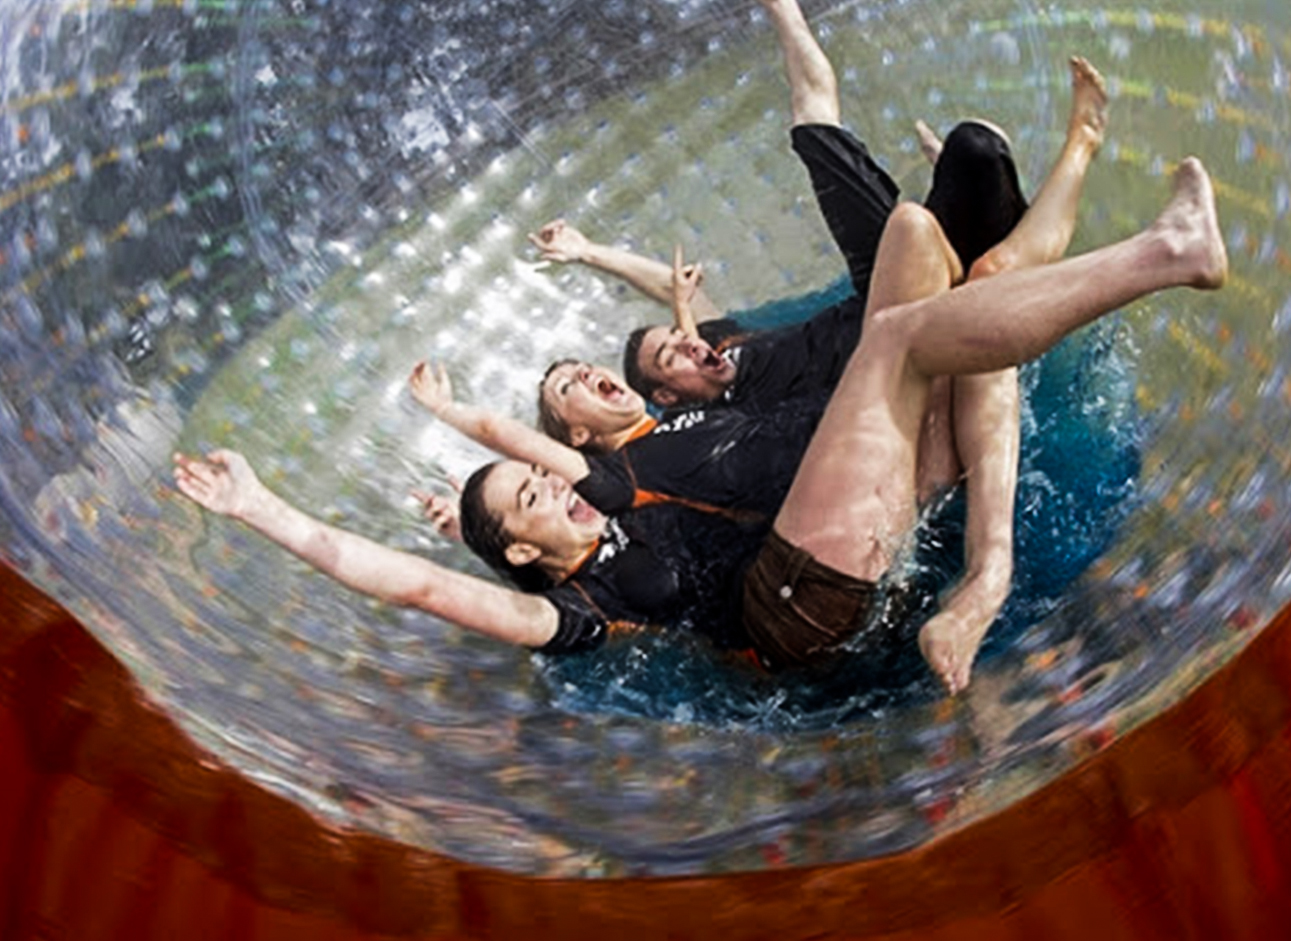 Zorbing - Enjoy the excitement of zorbing and rolling down hills in an inflatable ball